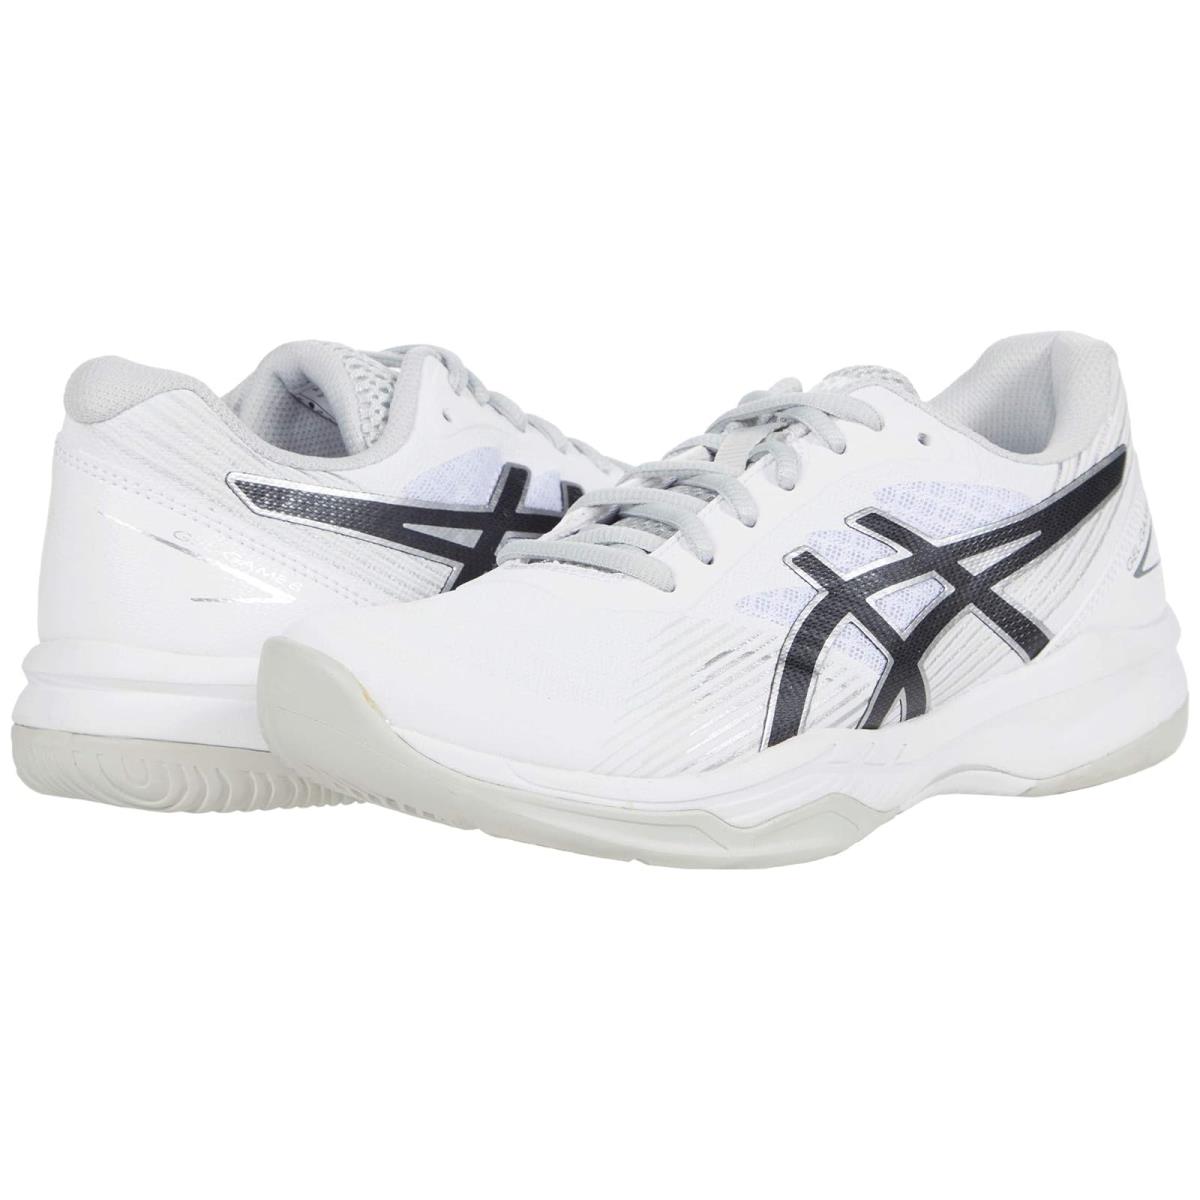 Woman`s Sneakers Athletic Shoes Asics Gel-game 8 White/Black